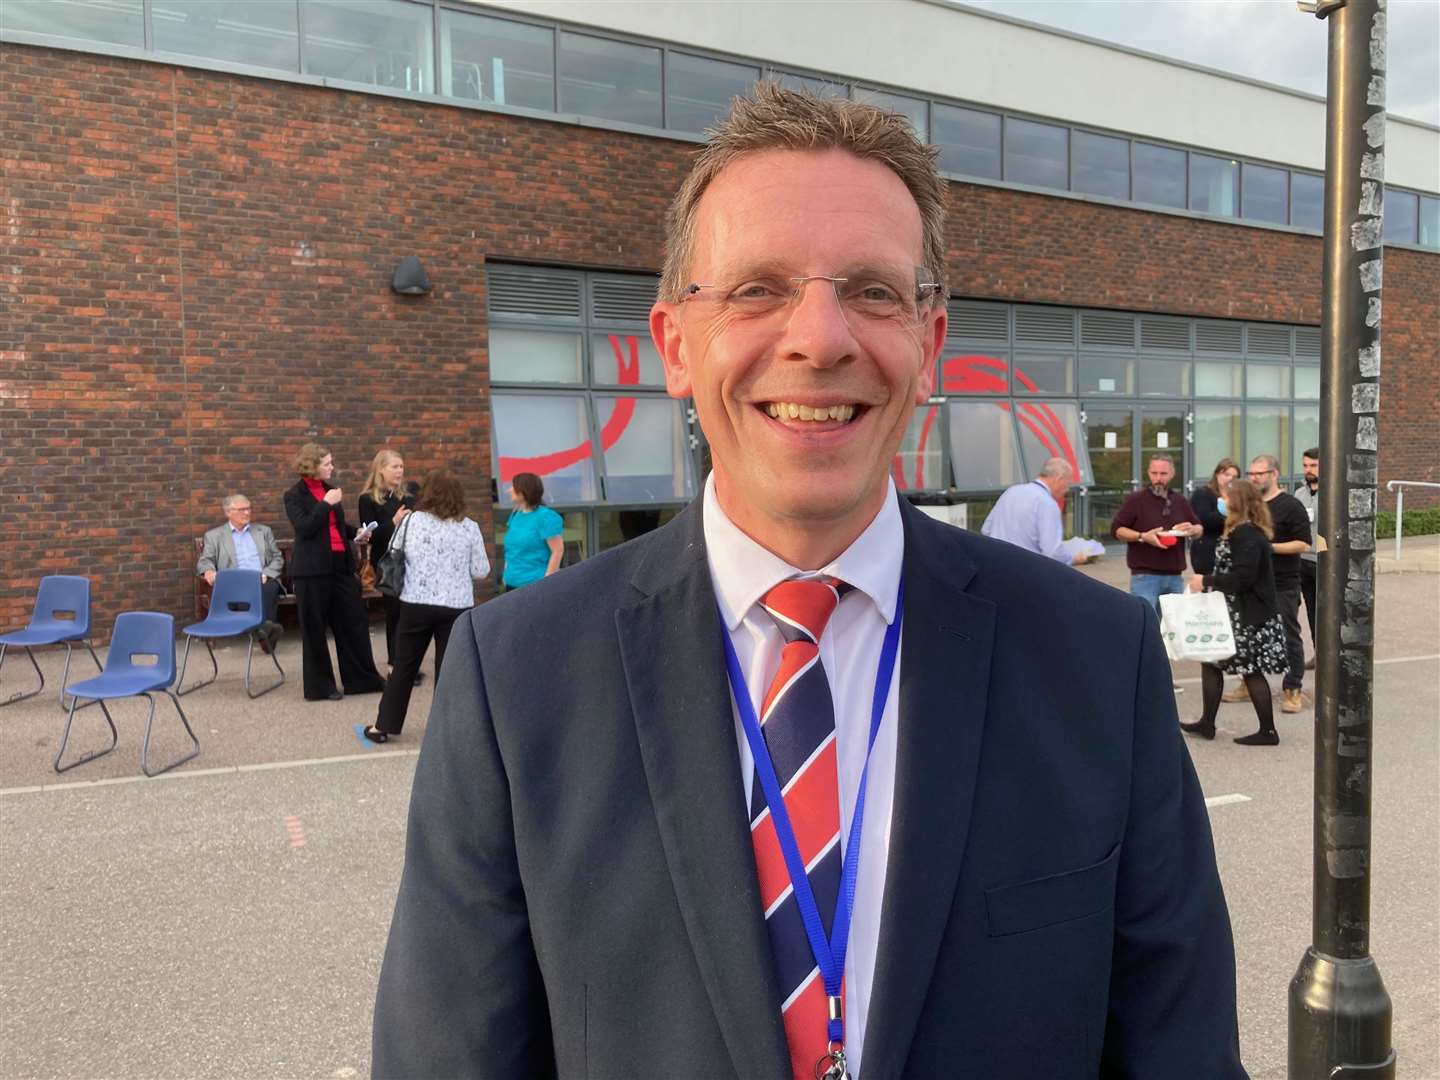 Andy Booth has taken over from Tina Lee as the new head of Oasis Academy Isle of Sheppey